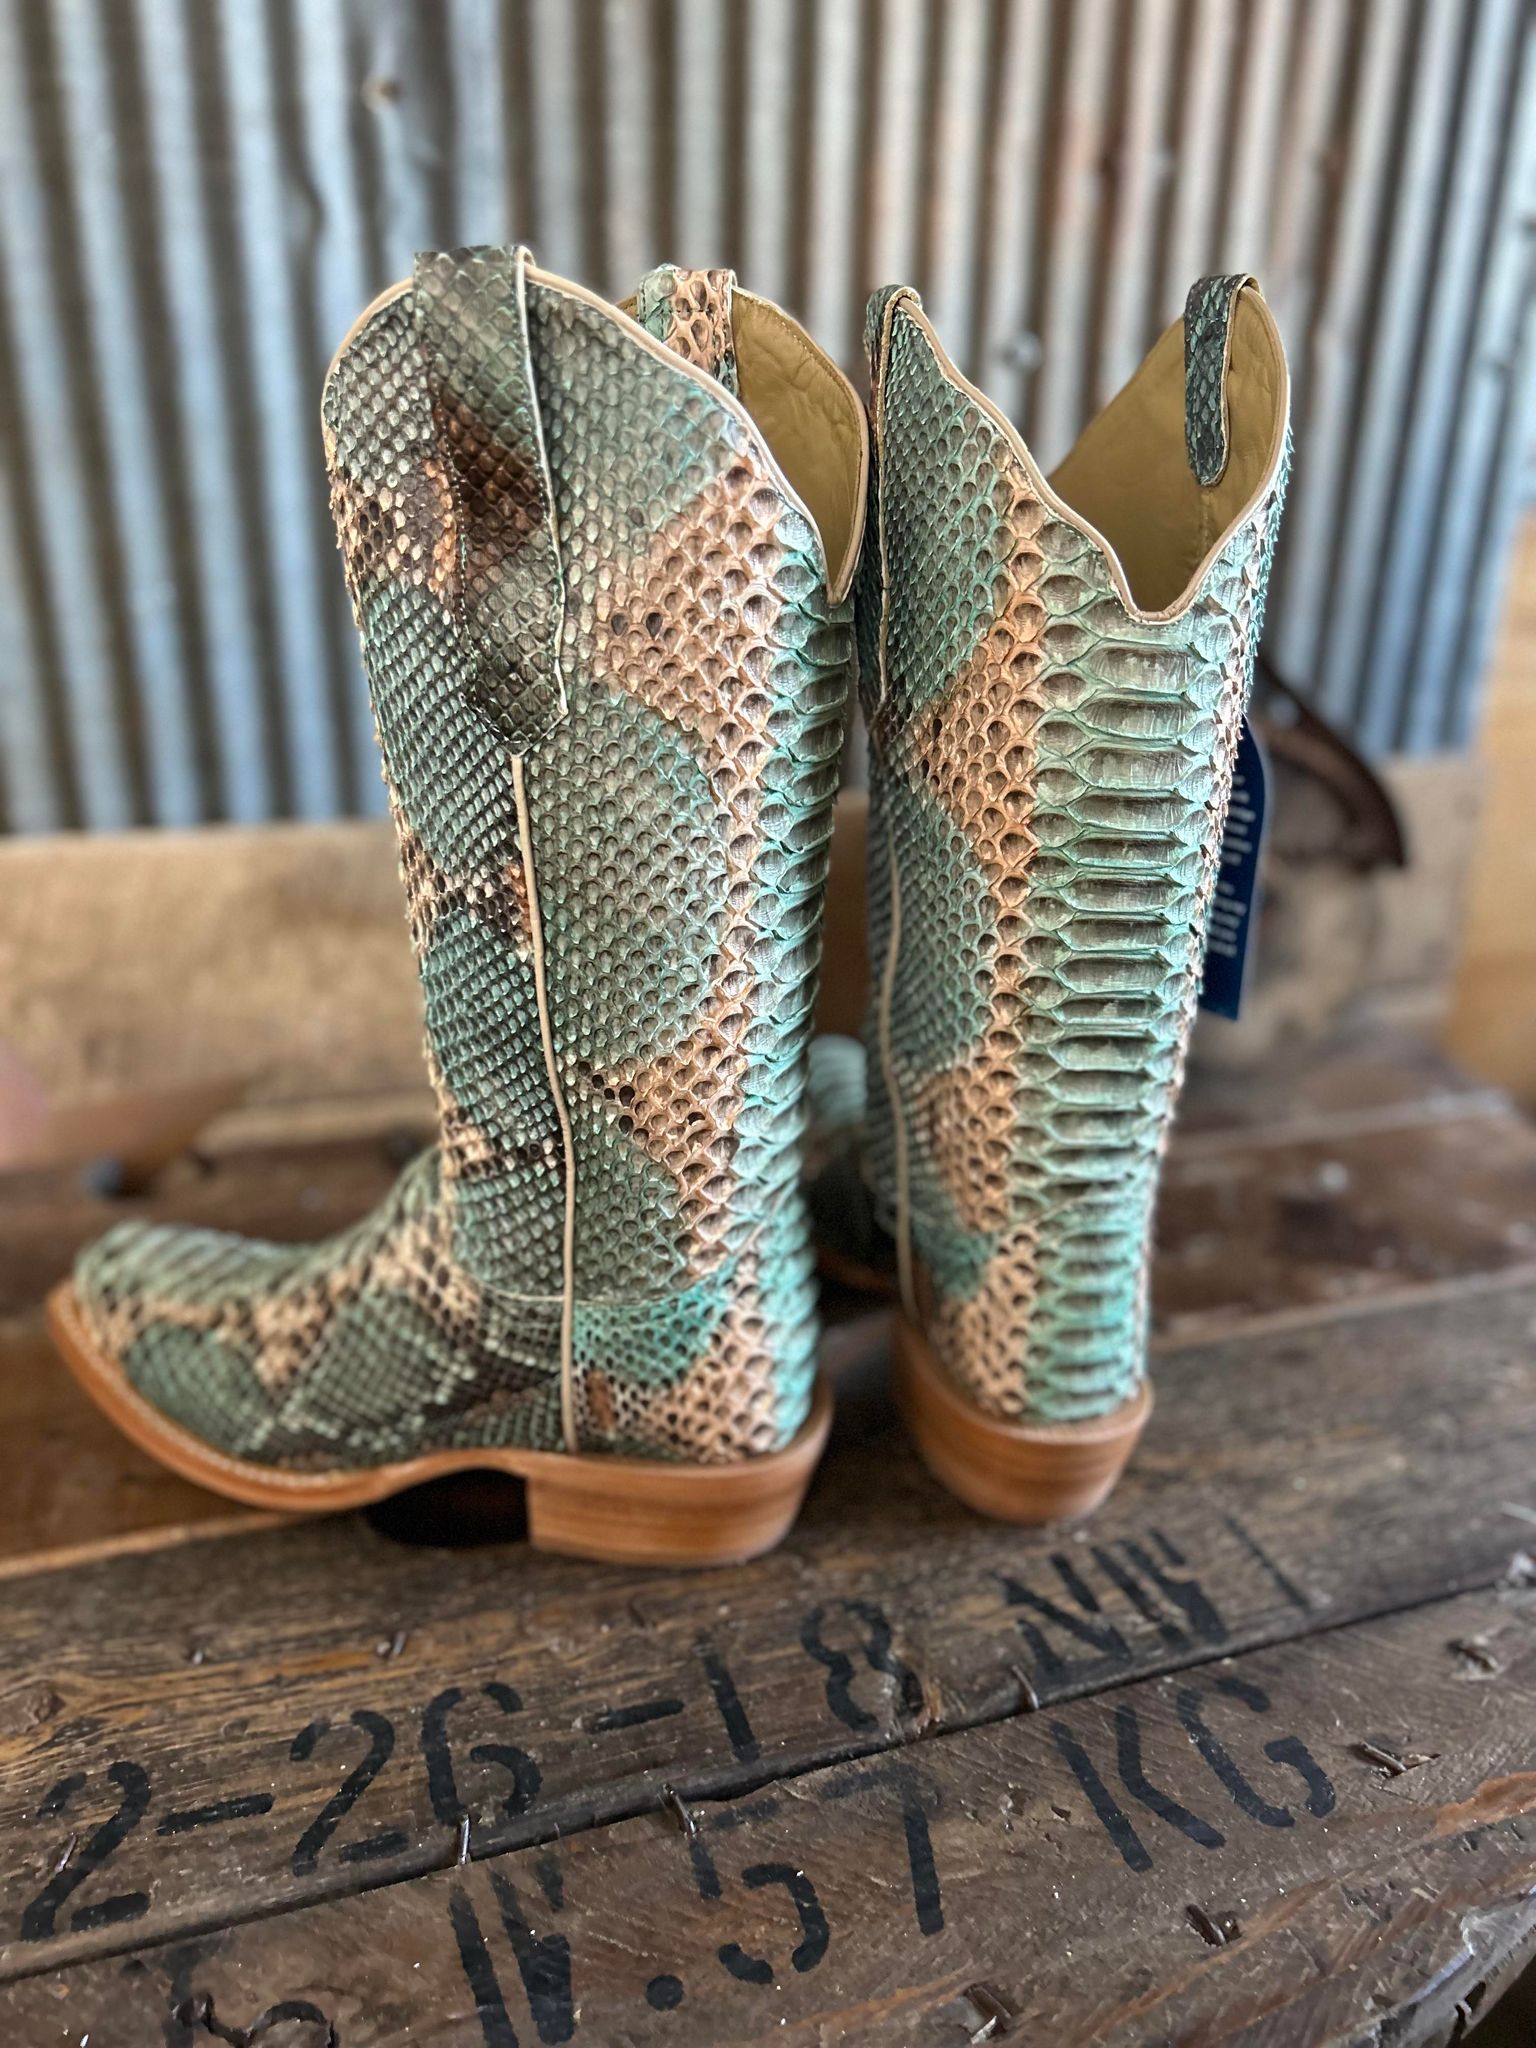 R. Watson Teal and Copper Python Boots-Women's Boots-R. Watson-Lucky J Boots & More, Women's, Men's, & Kids Western Store Located in Carthage, MO